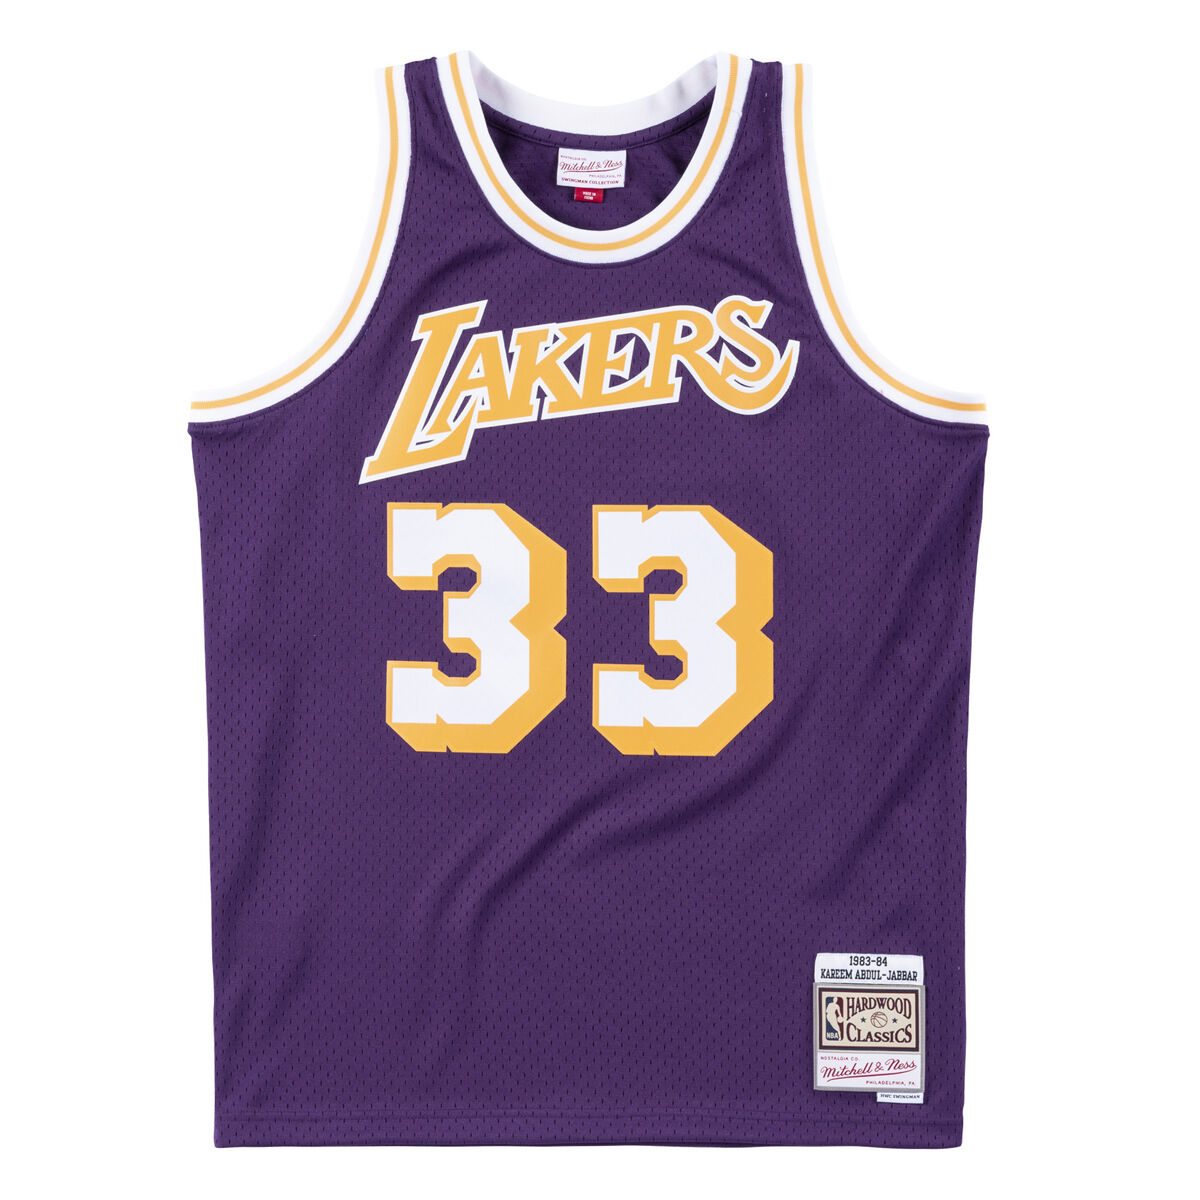 lakers jersey on sale